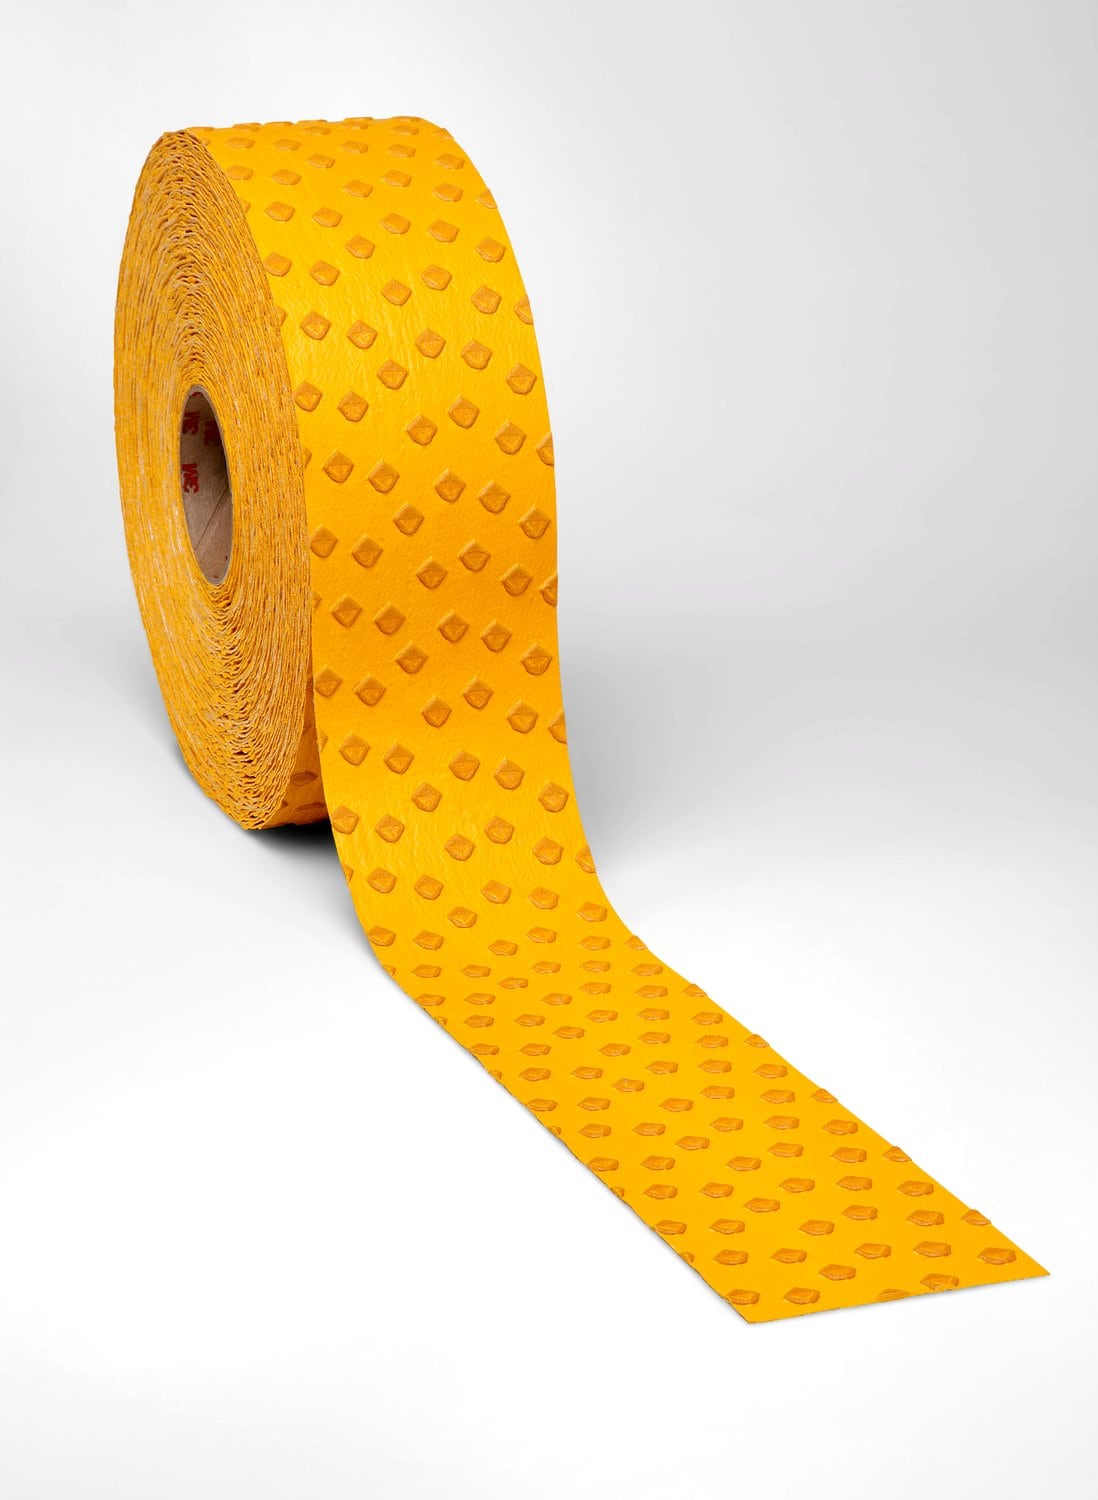 7010316751 - 3M Stamark Removable Pavement Marking Tape A711, Yellow, 4 in x 120
yd, 36 roll bulk pack